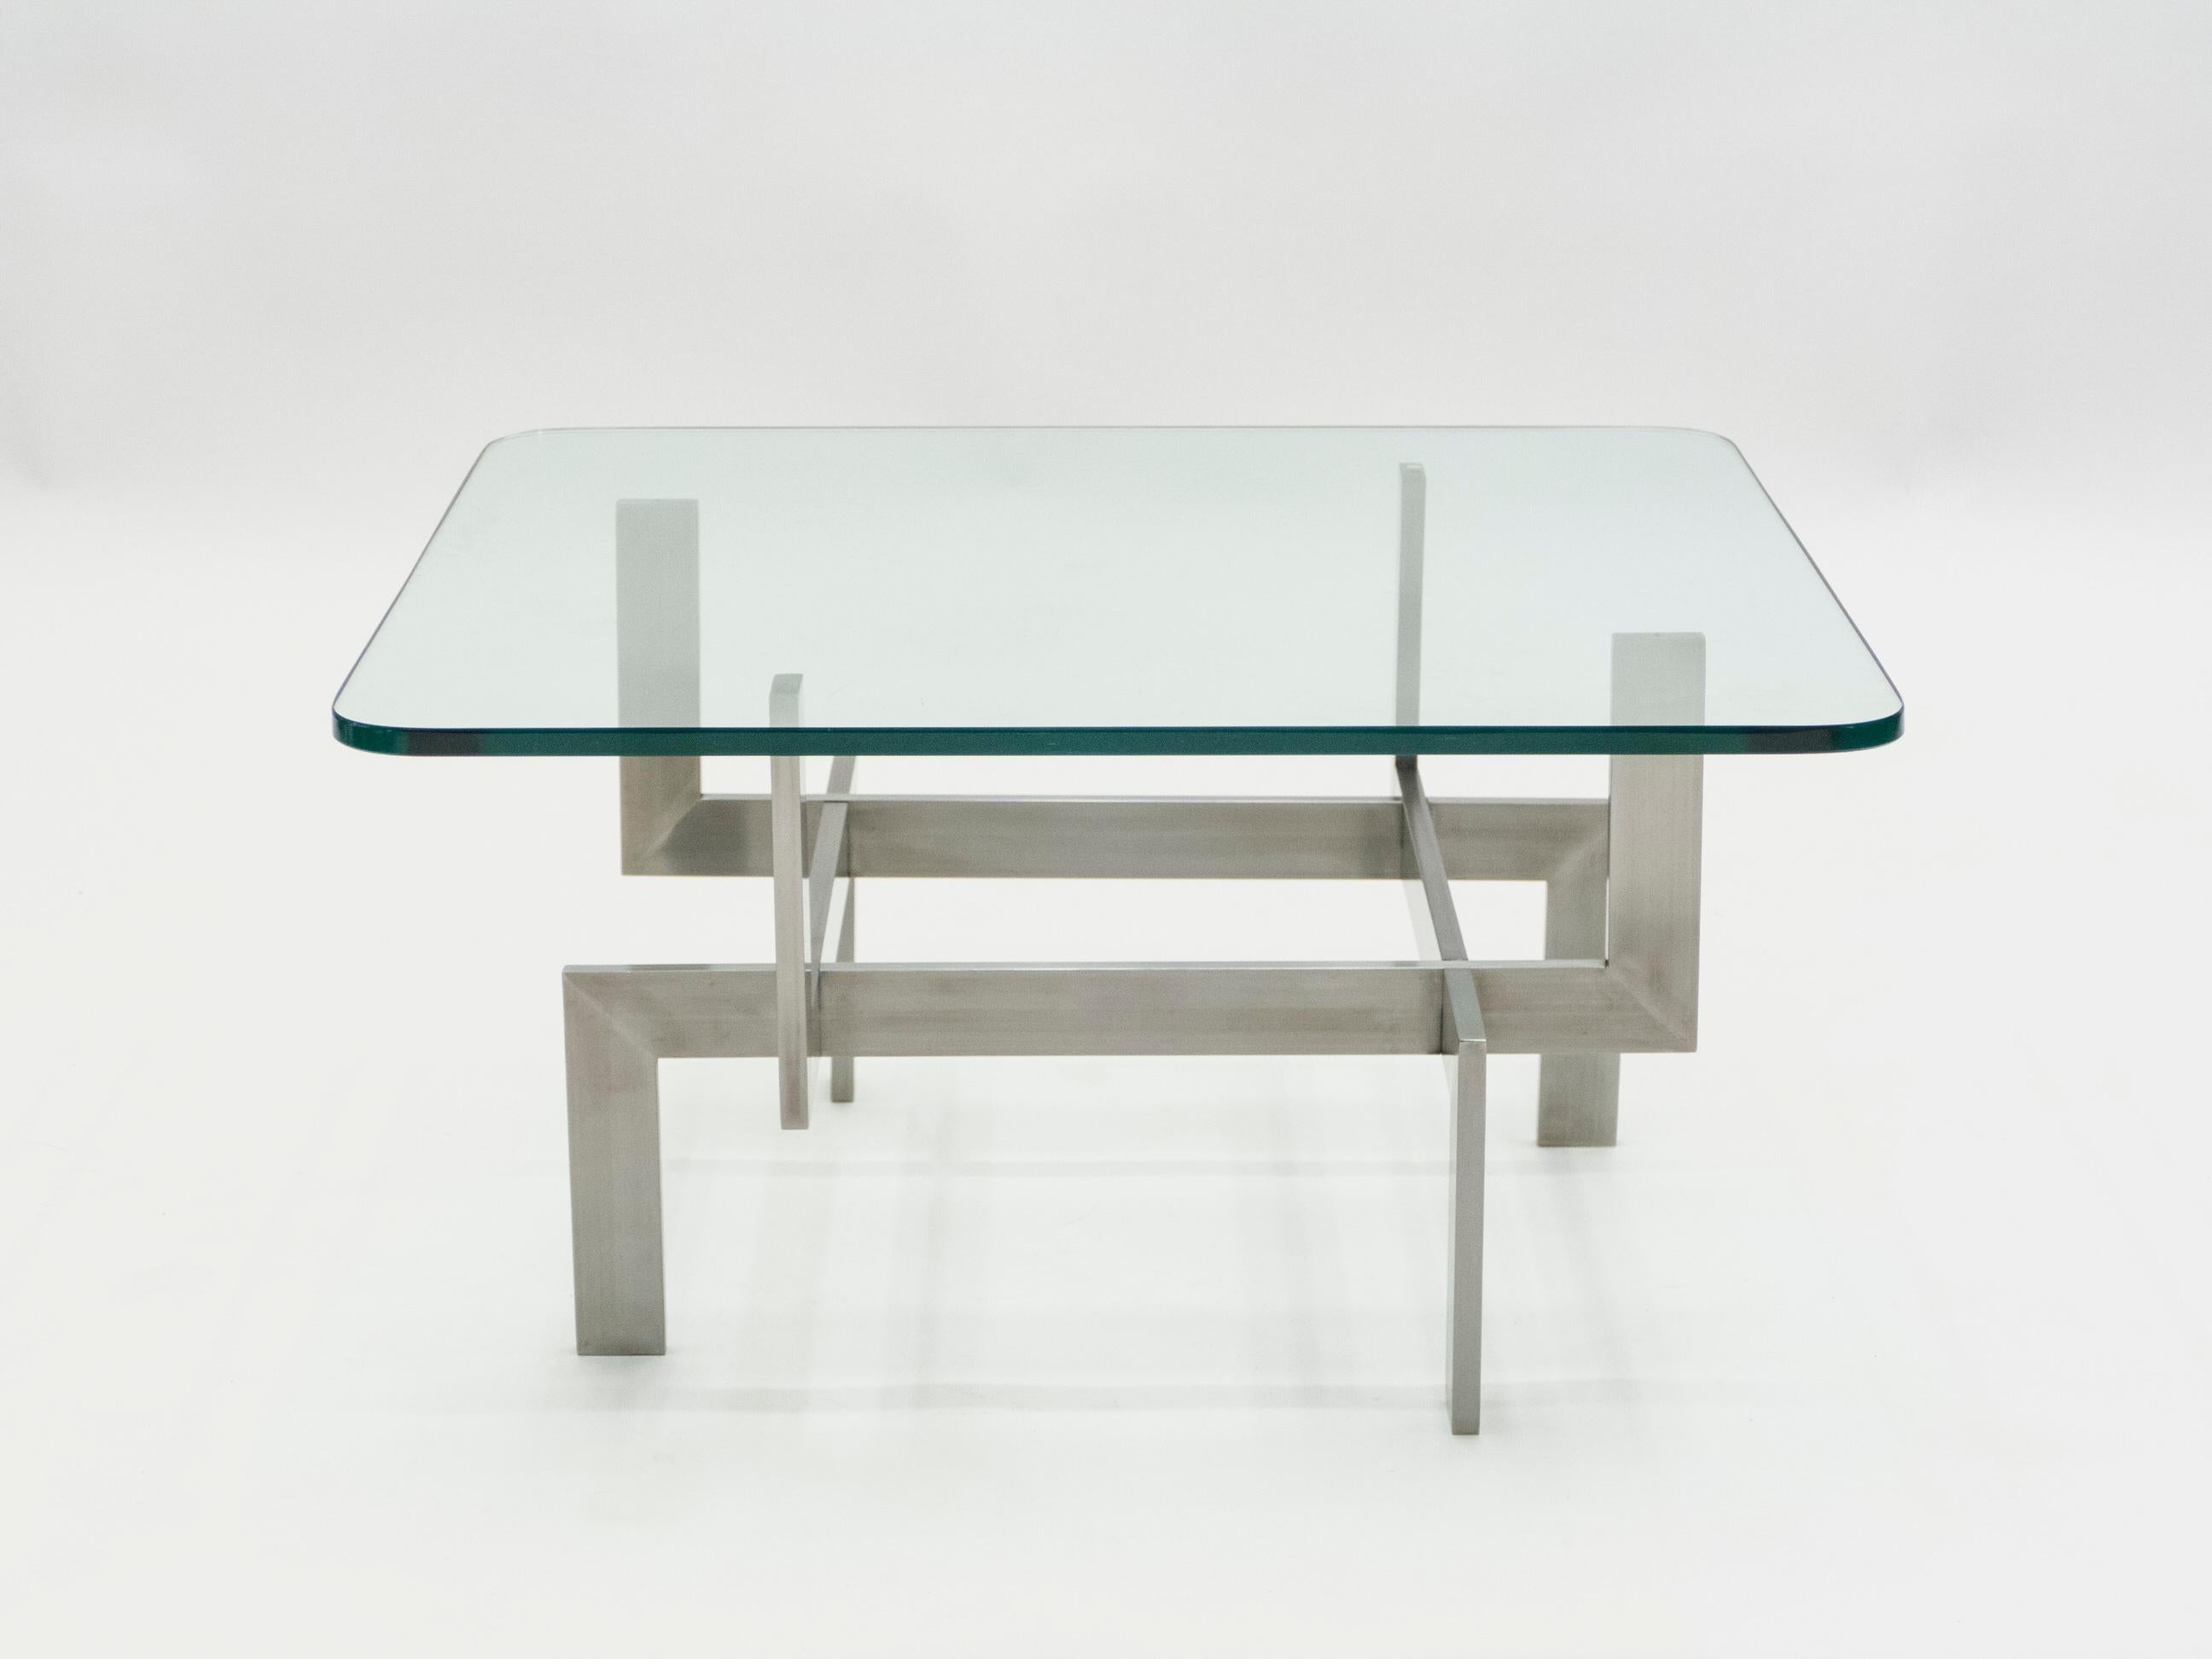 Brushed steel features sharp, symmetrical angles in this coffee table by French designer Paul Legeard. Designed in the 1970s, the sleek midcentury designs got a sculptural upgrade with the legs fitting together like machinery beneath the thick,